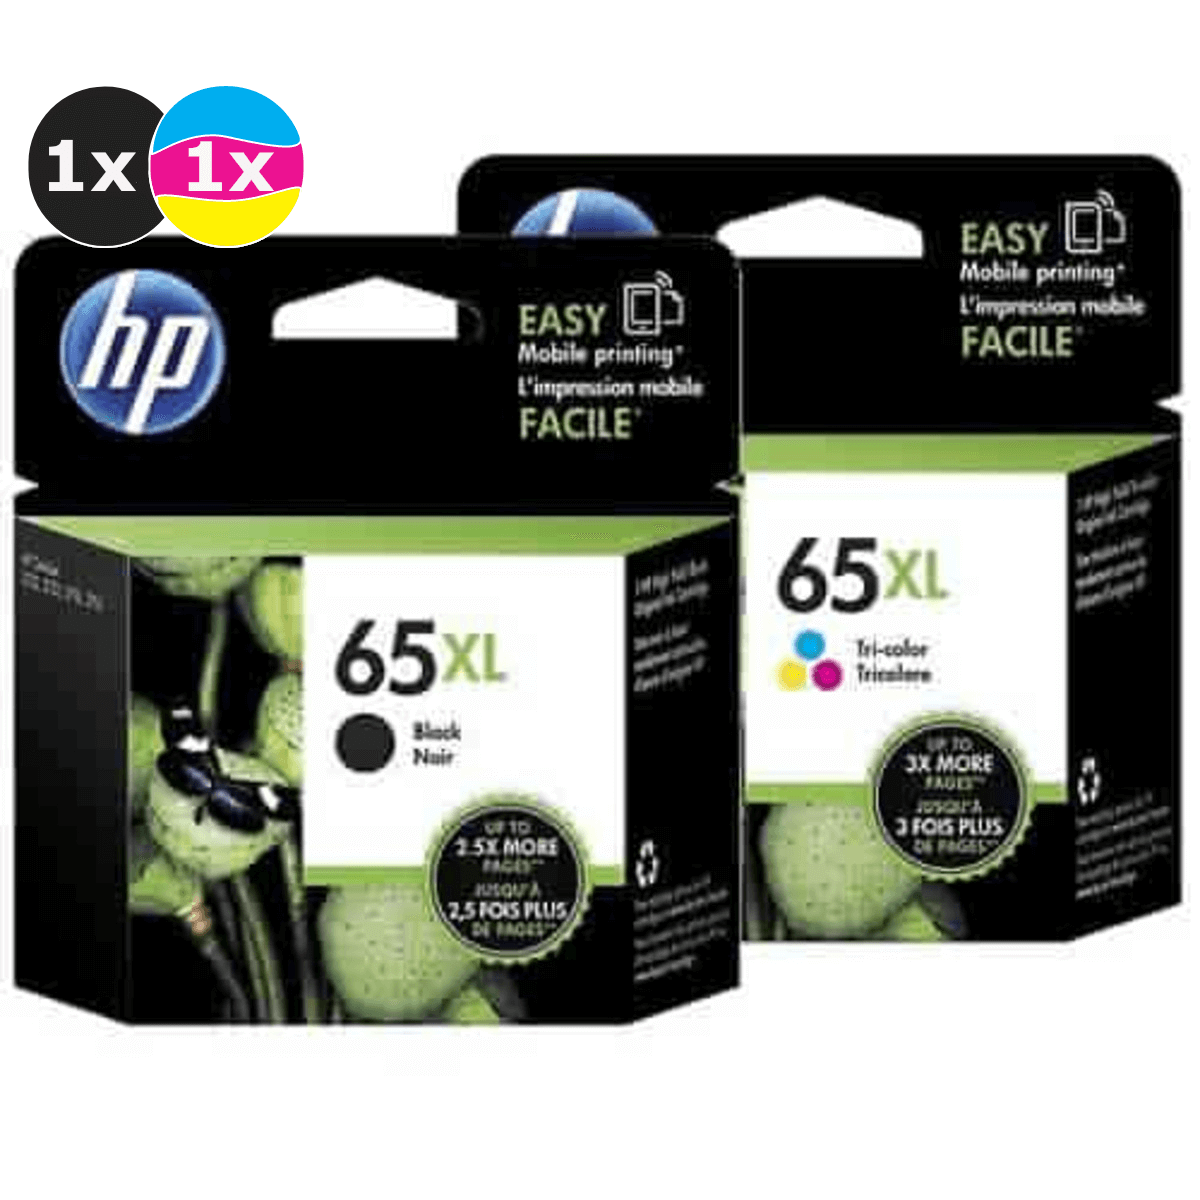 HP 65XL Black and Colour Ink Cartridge Combo Pack